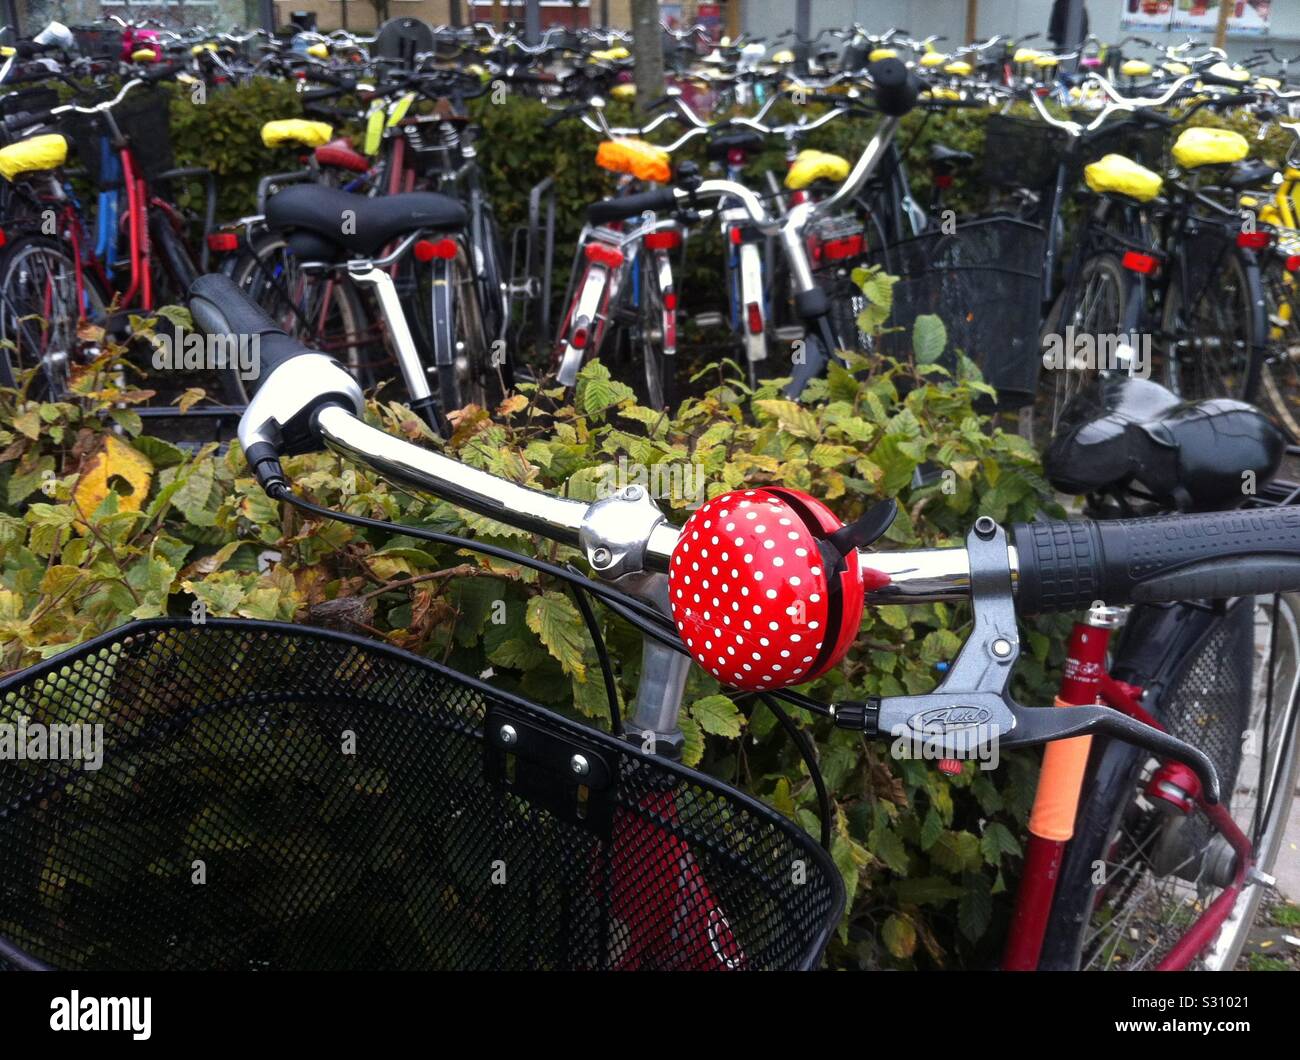 Closeup shot of a red and white spotted bicycle bell and parked bikes in background. Uppsala city train station parking soon to host a huge indoors new parking site. Sweden Stock Photo